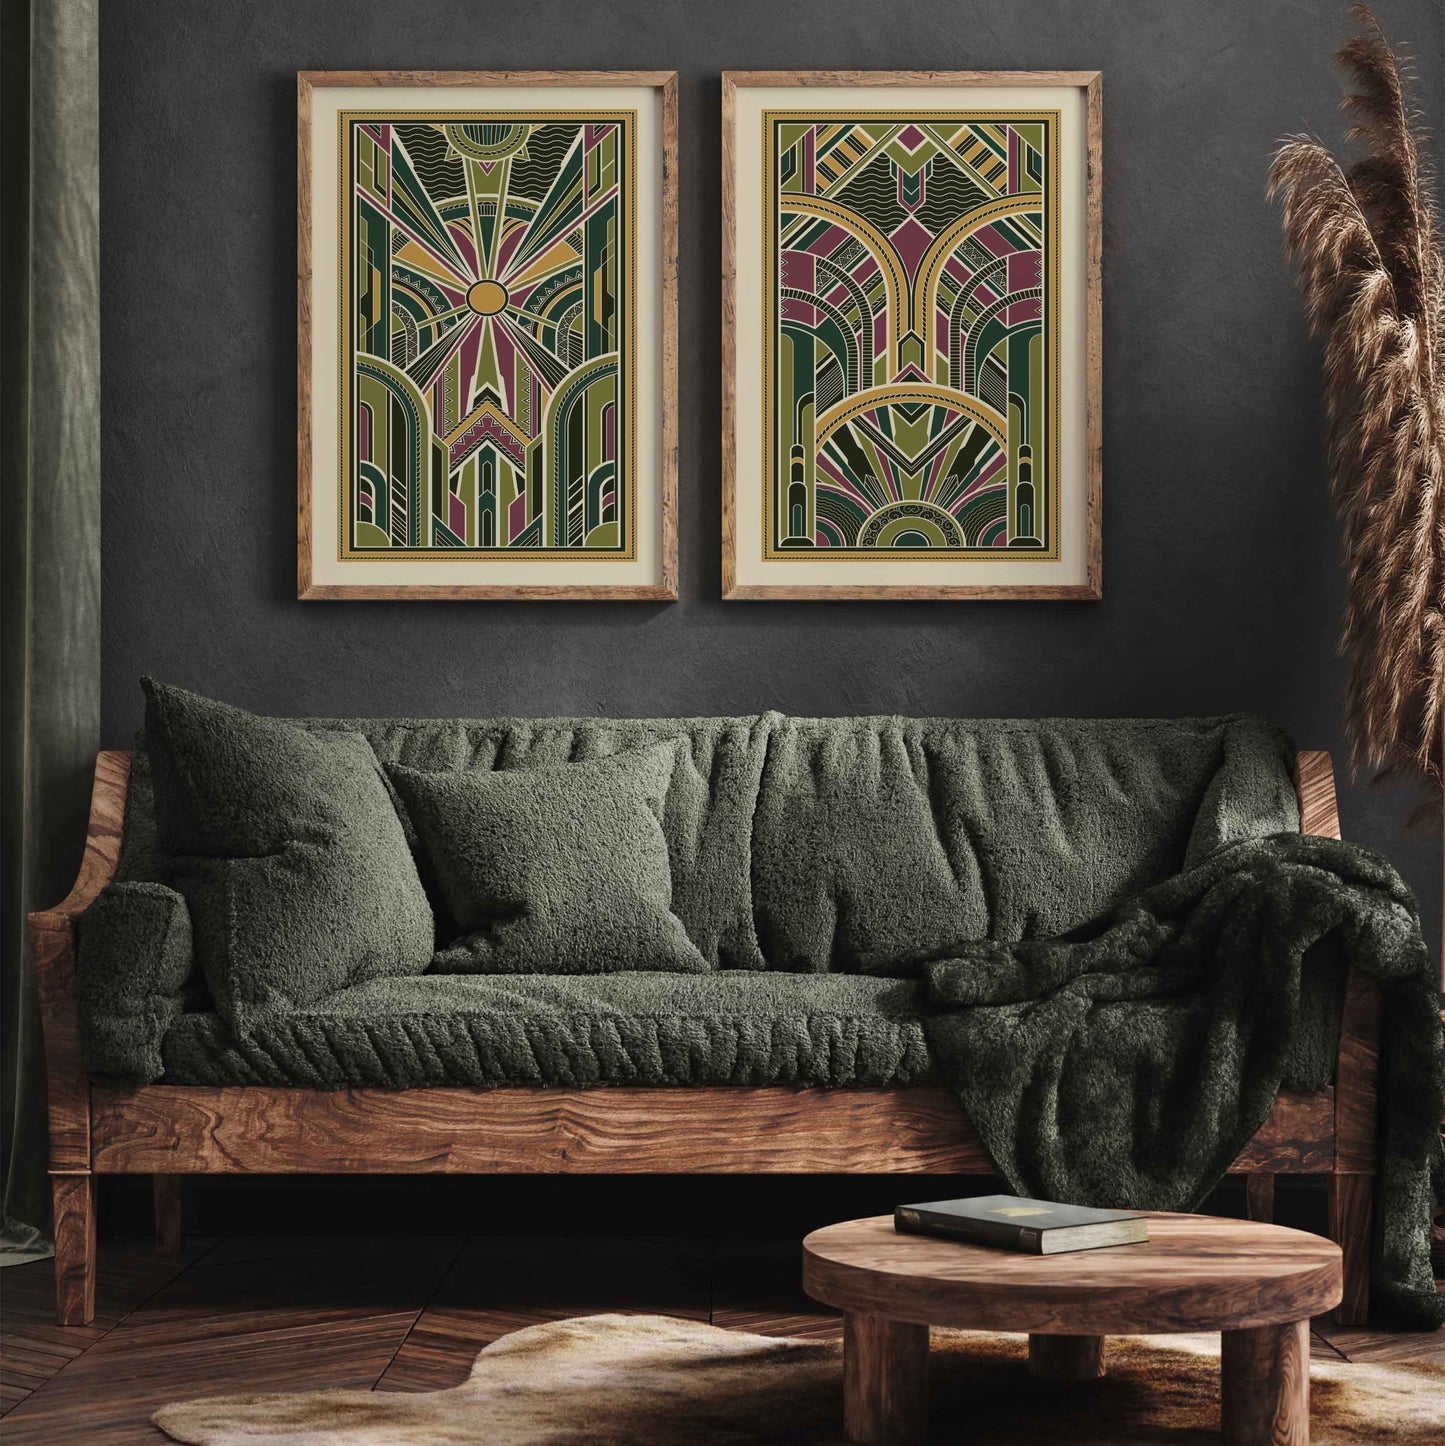 Art deco poster set with an eye-catching geometric pattern